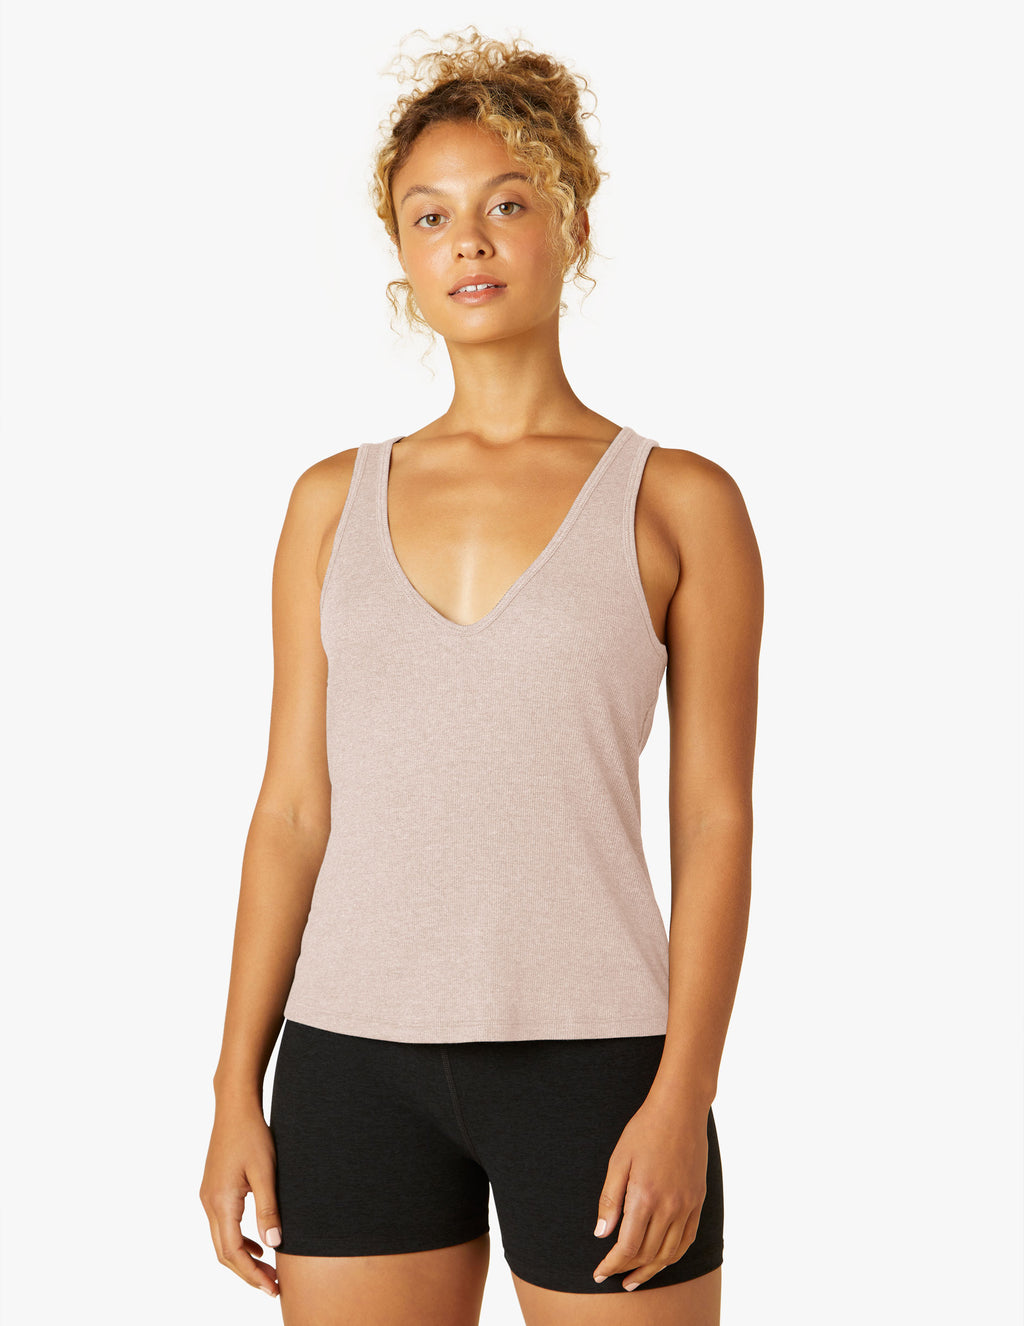 Take The Plunge V-Neck Tank Featured Image